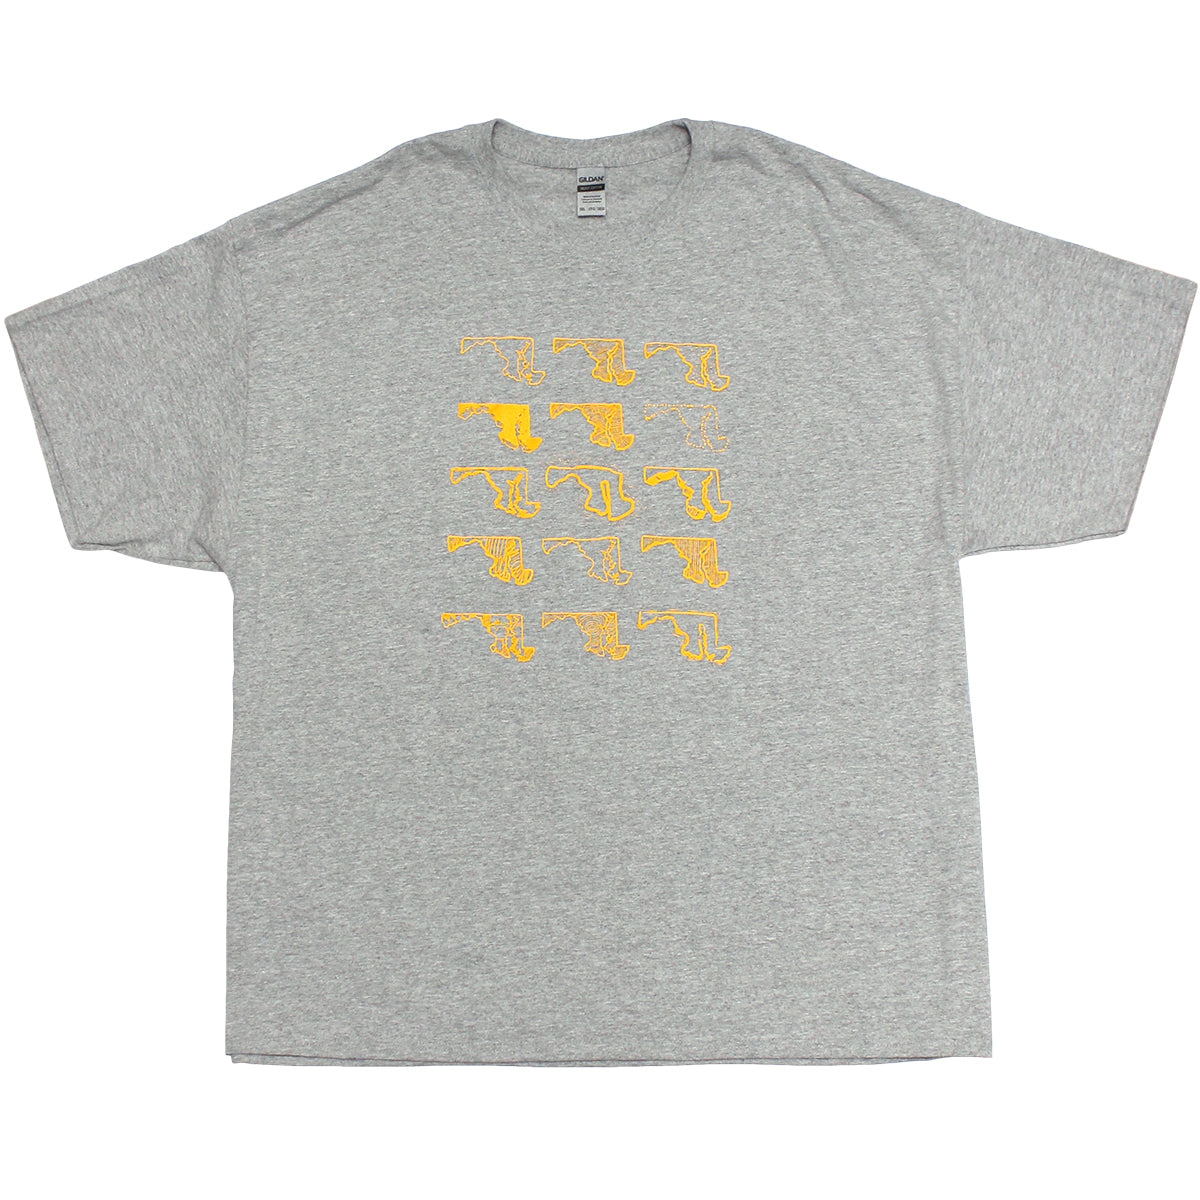 Many Shapes of Maryland (Grey) / Shirt - Route One Apparel